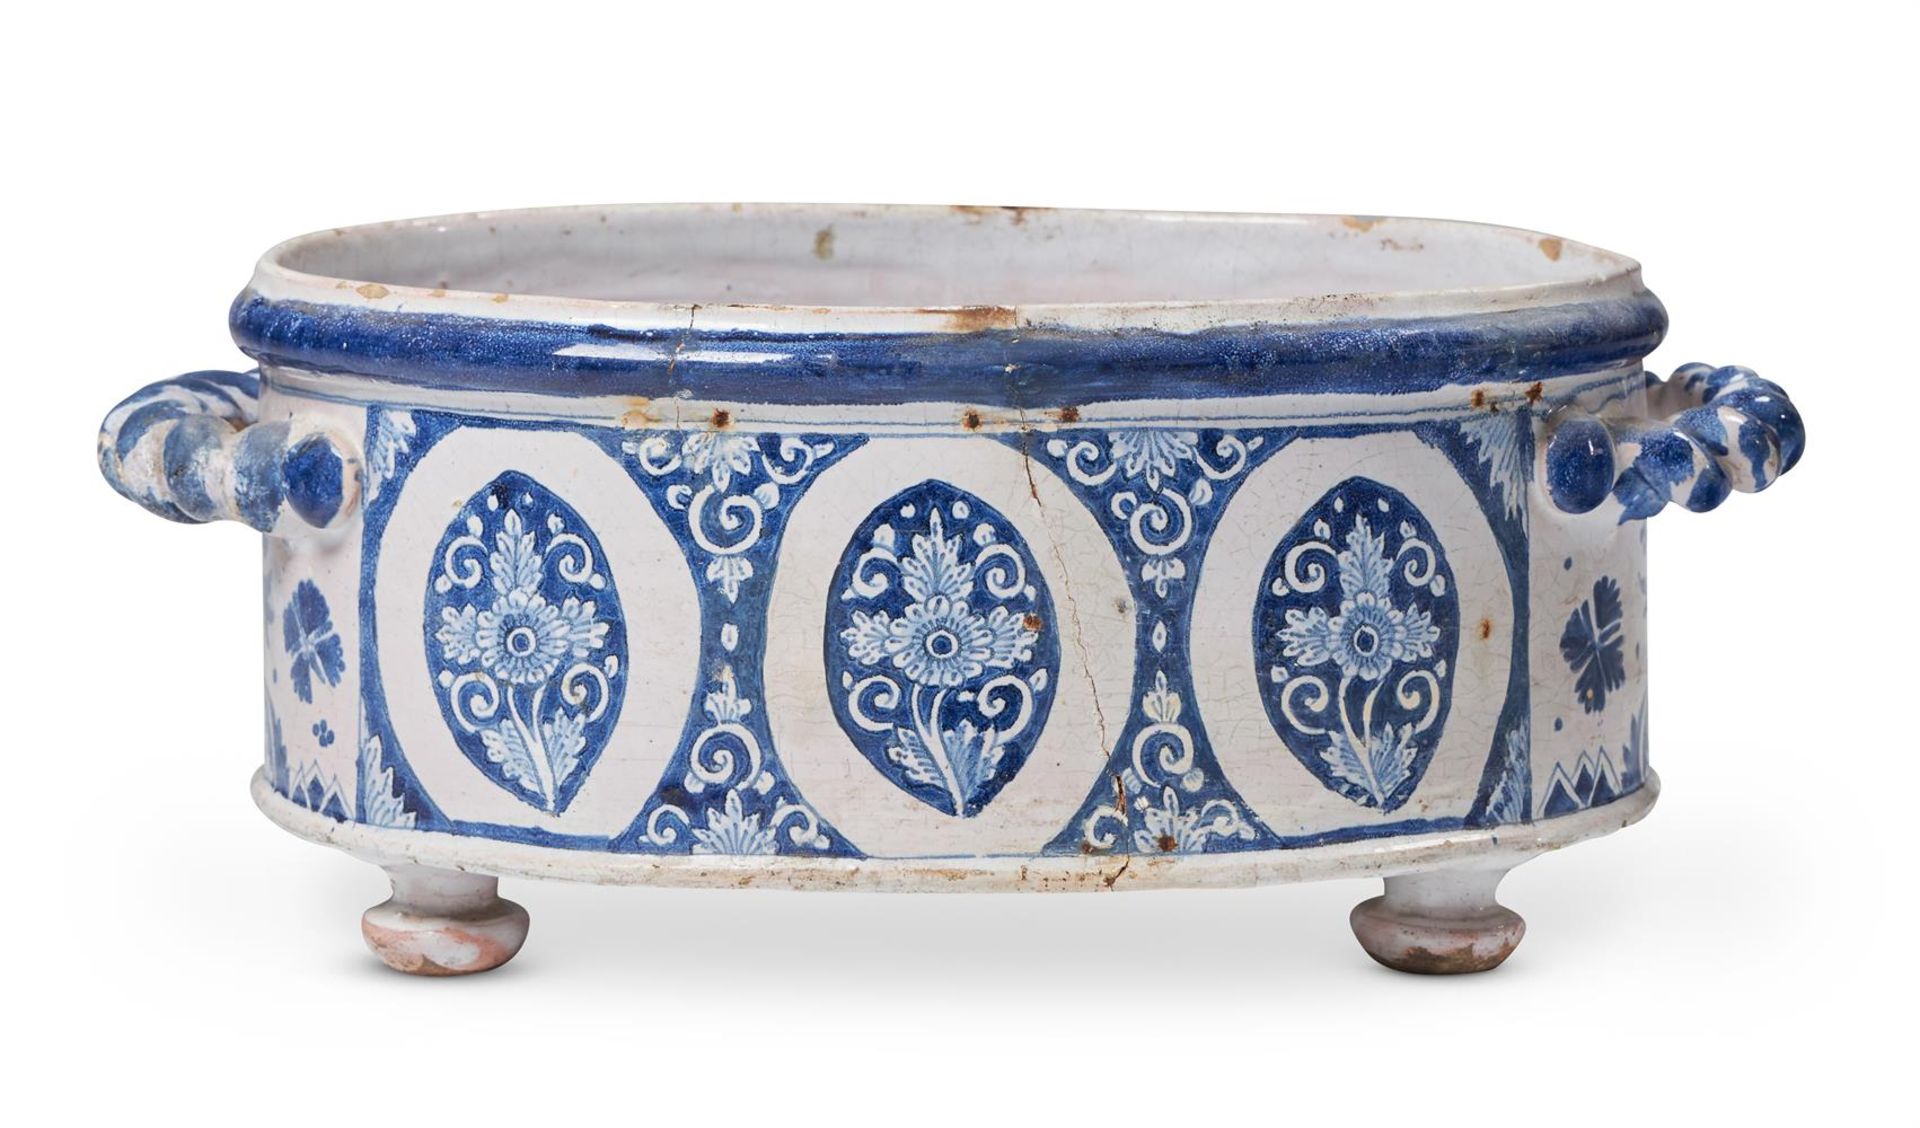 A FRENCH FAIENCE TWO HANDLED JARDINIERE OR CISTERN PROBABLY ROUEN, 18TH CENTURY - Image 2 of 5